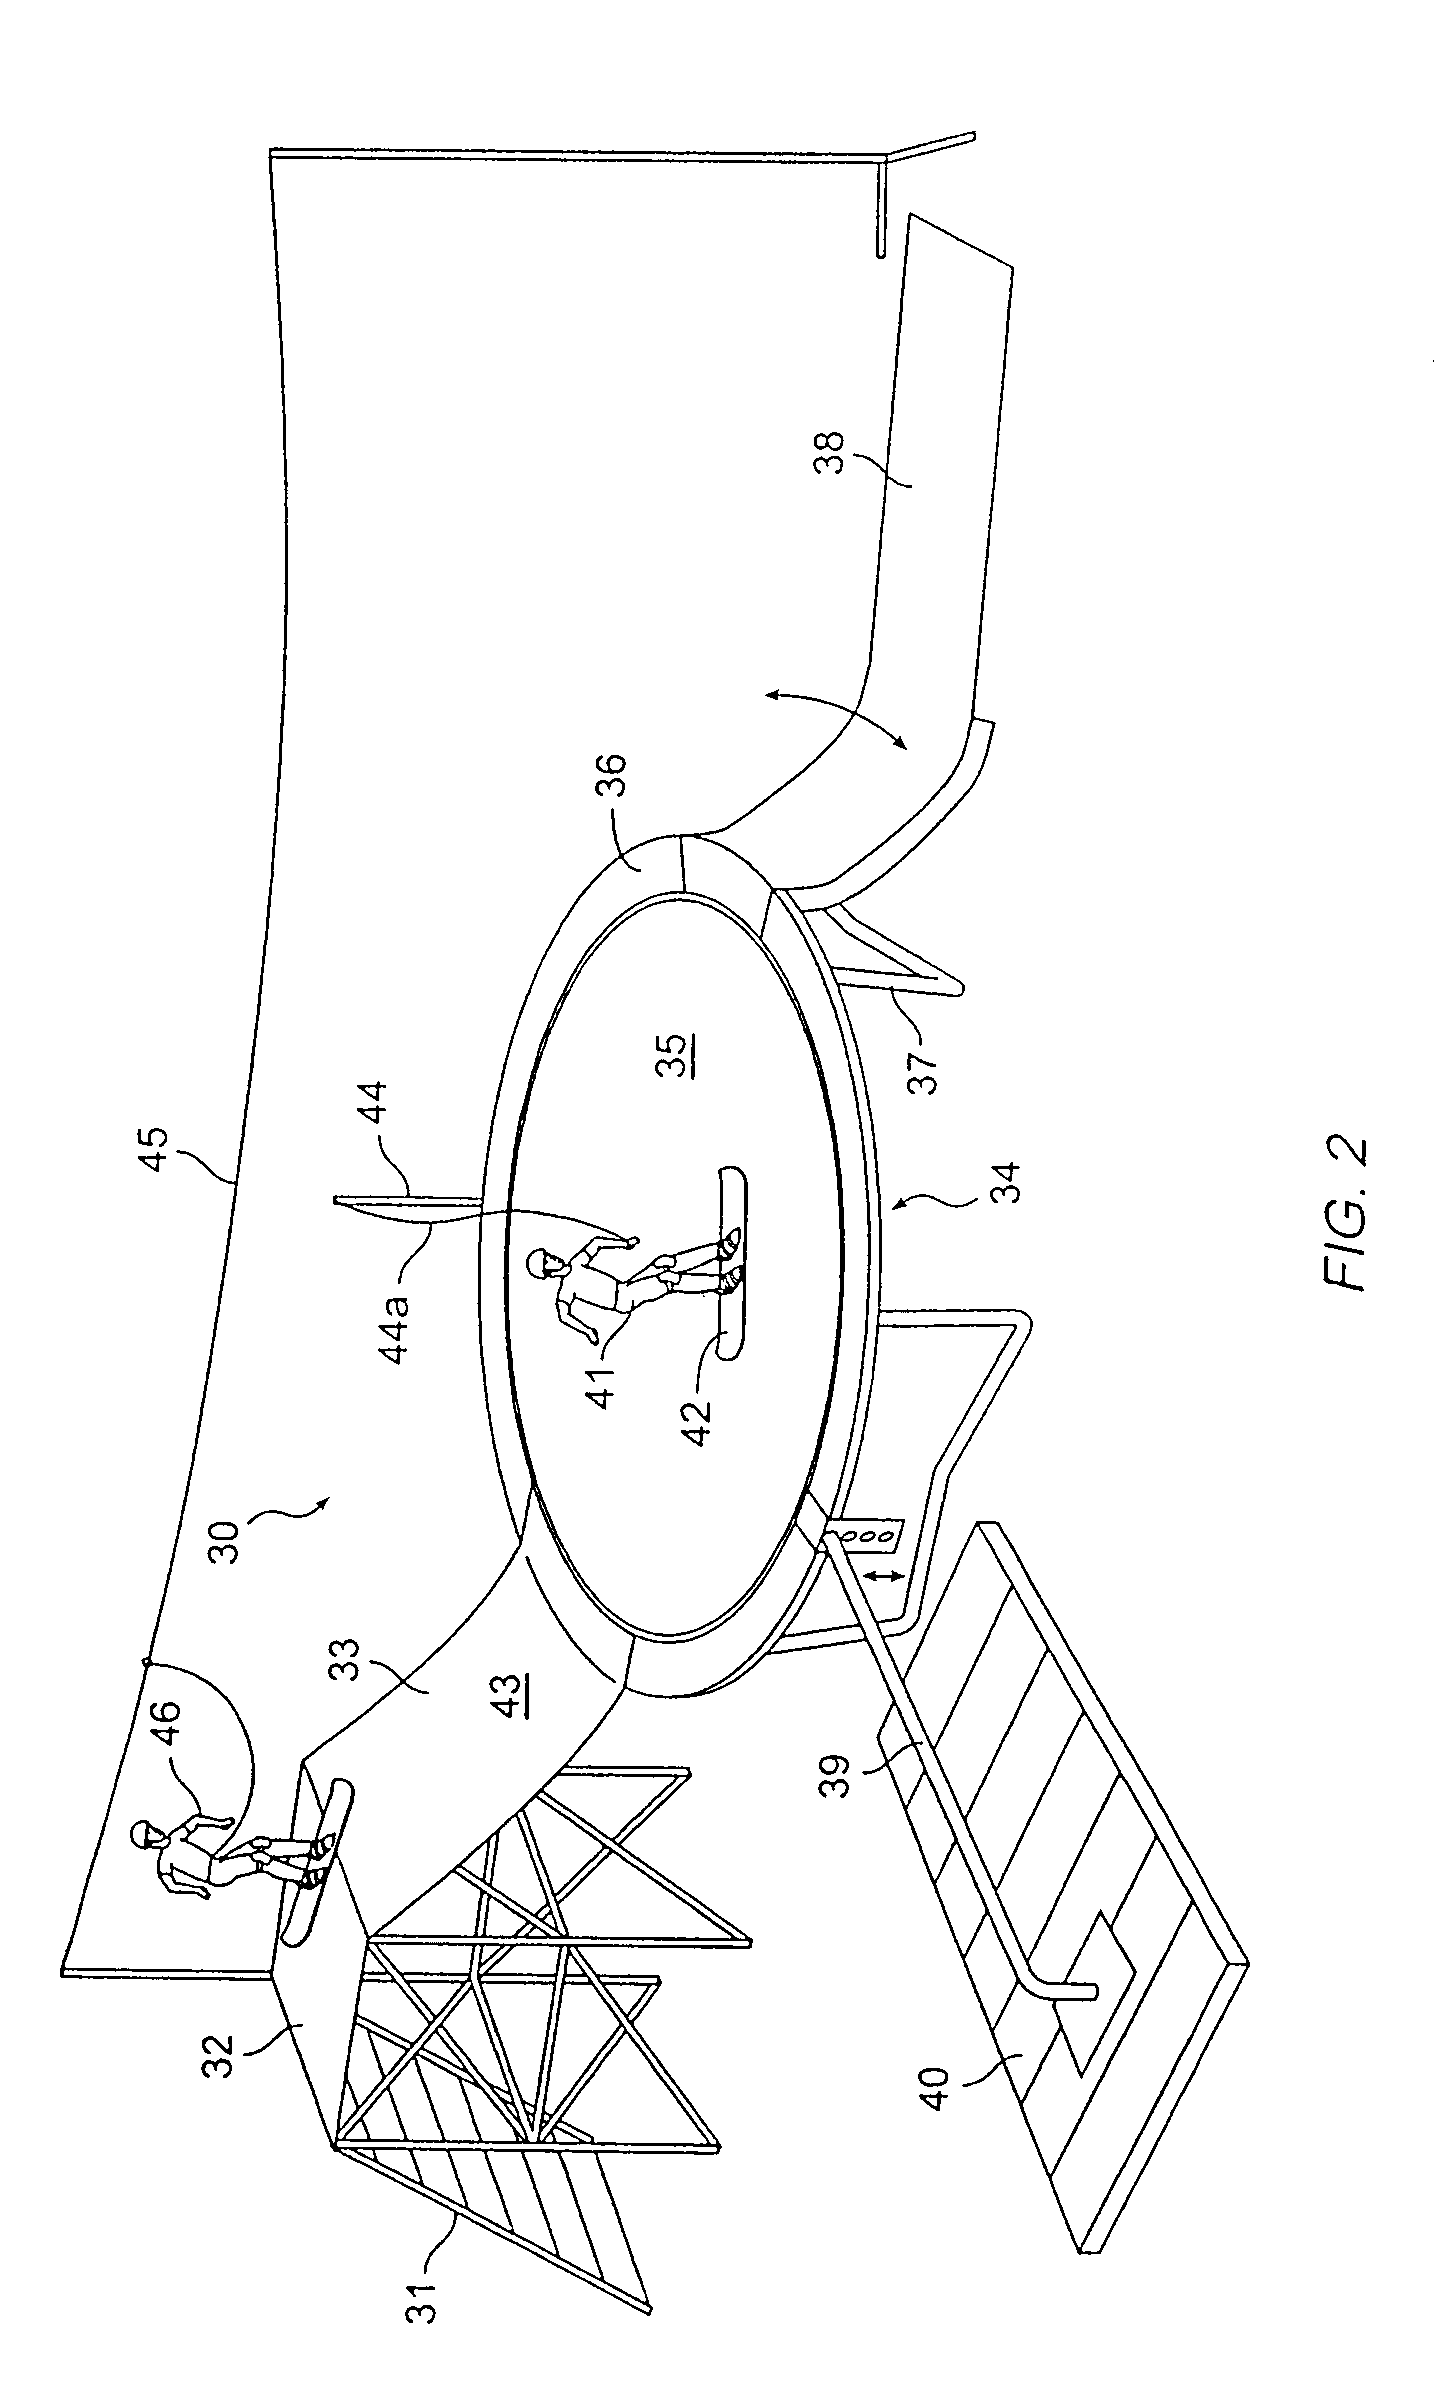 Sliding exercise apparatus and recreational device